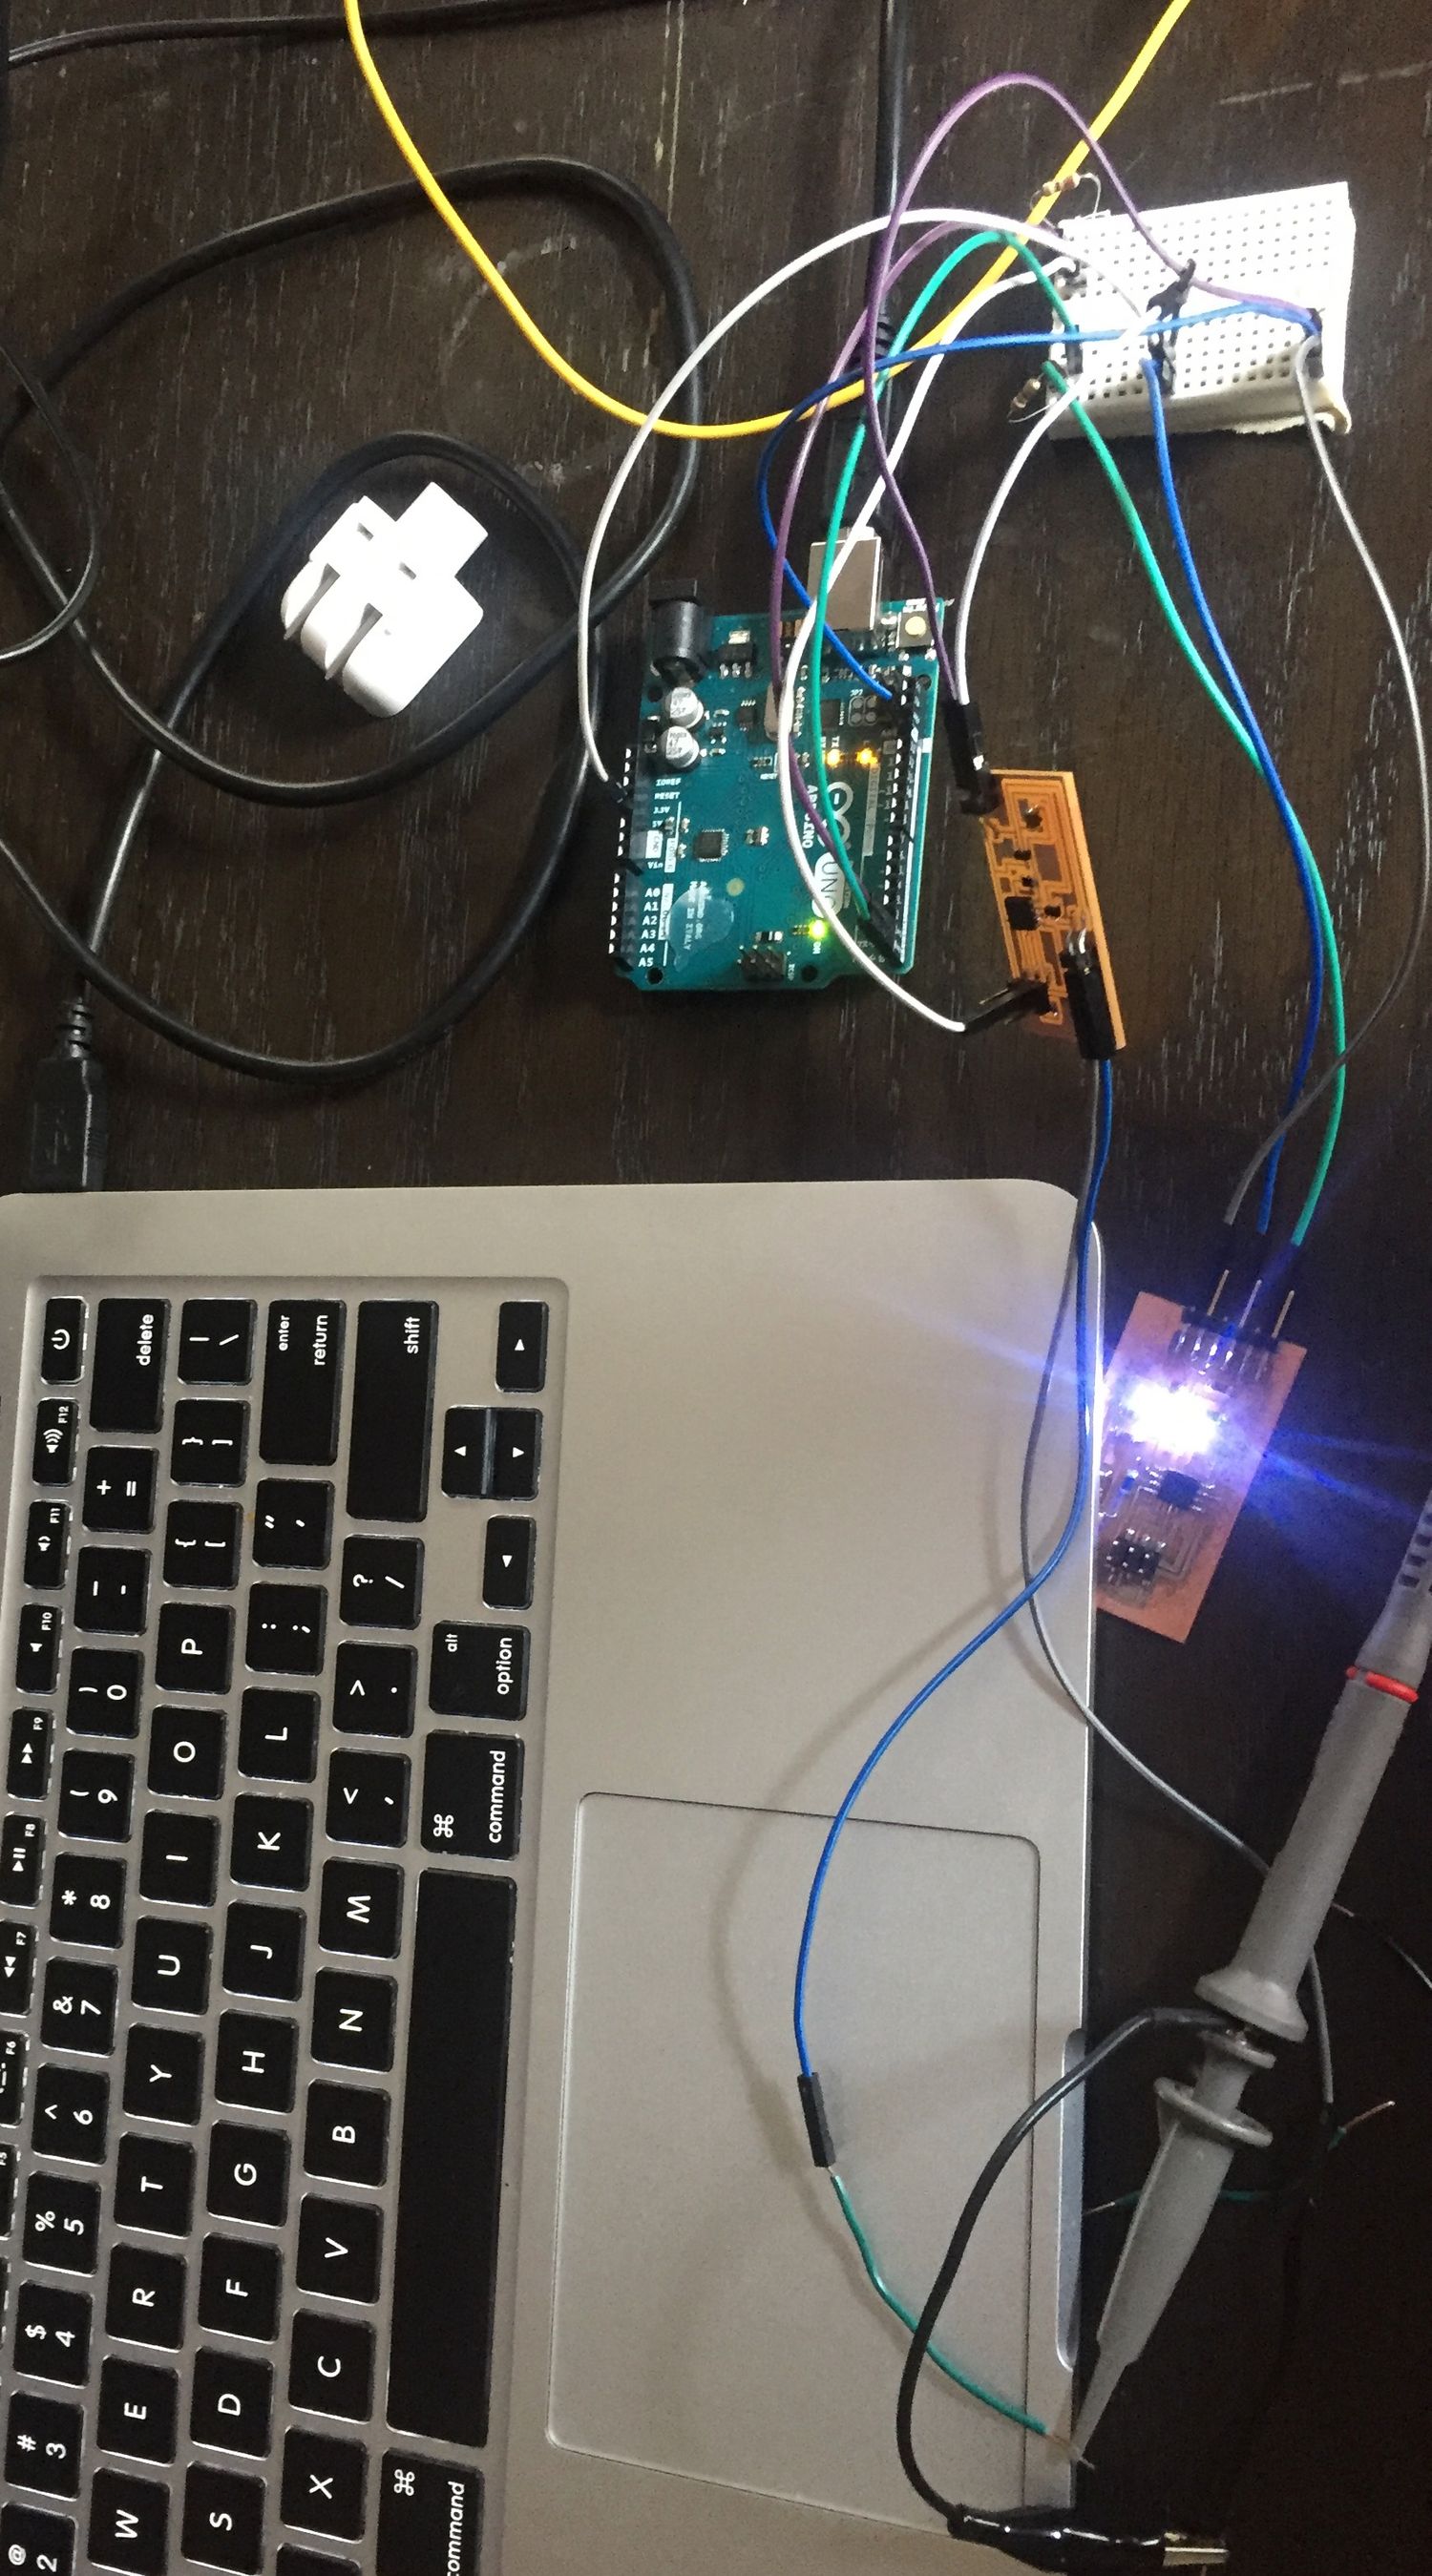 Lots of wires, a breadboard, laptop, and an Arduino on a dark table